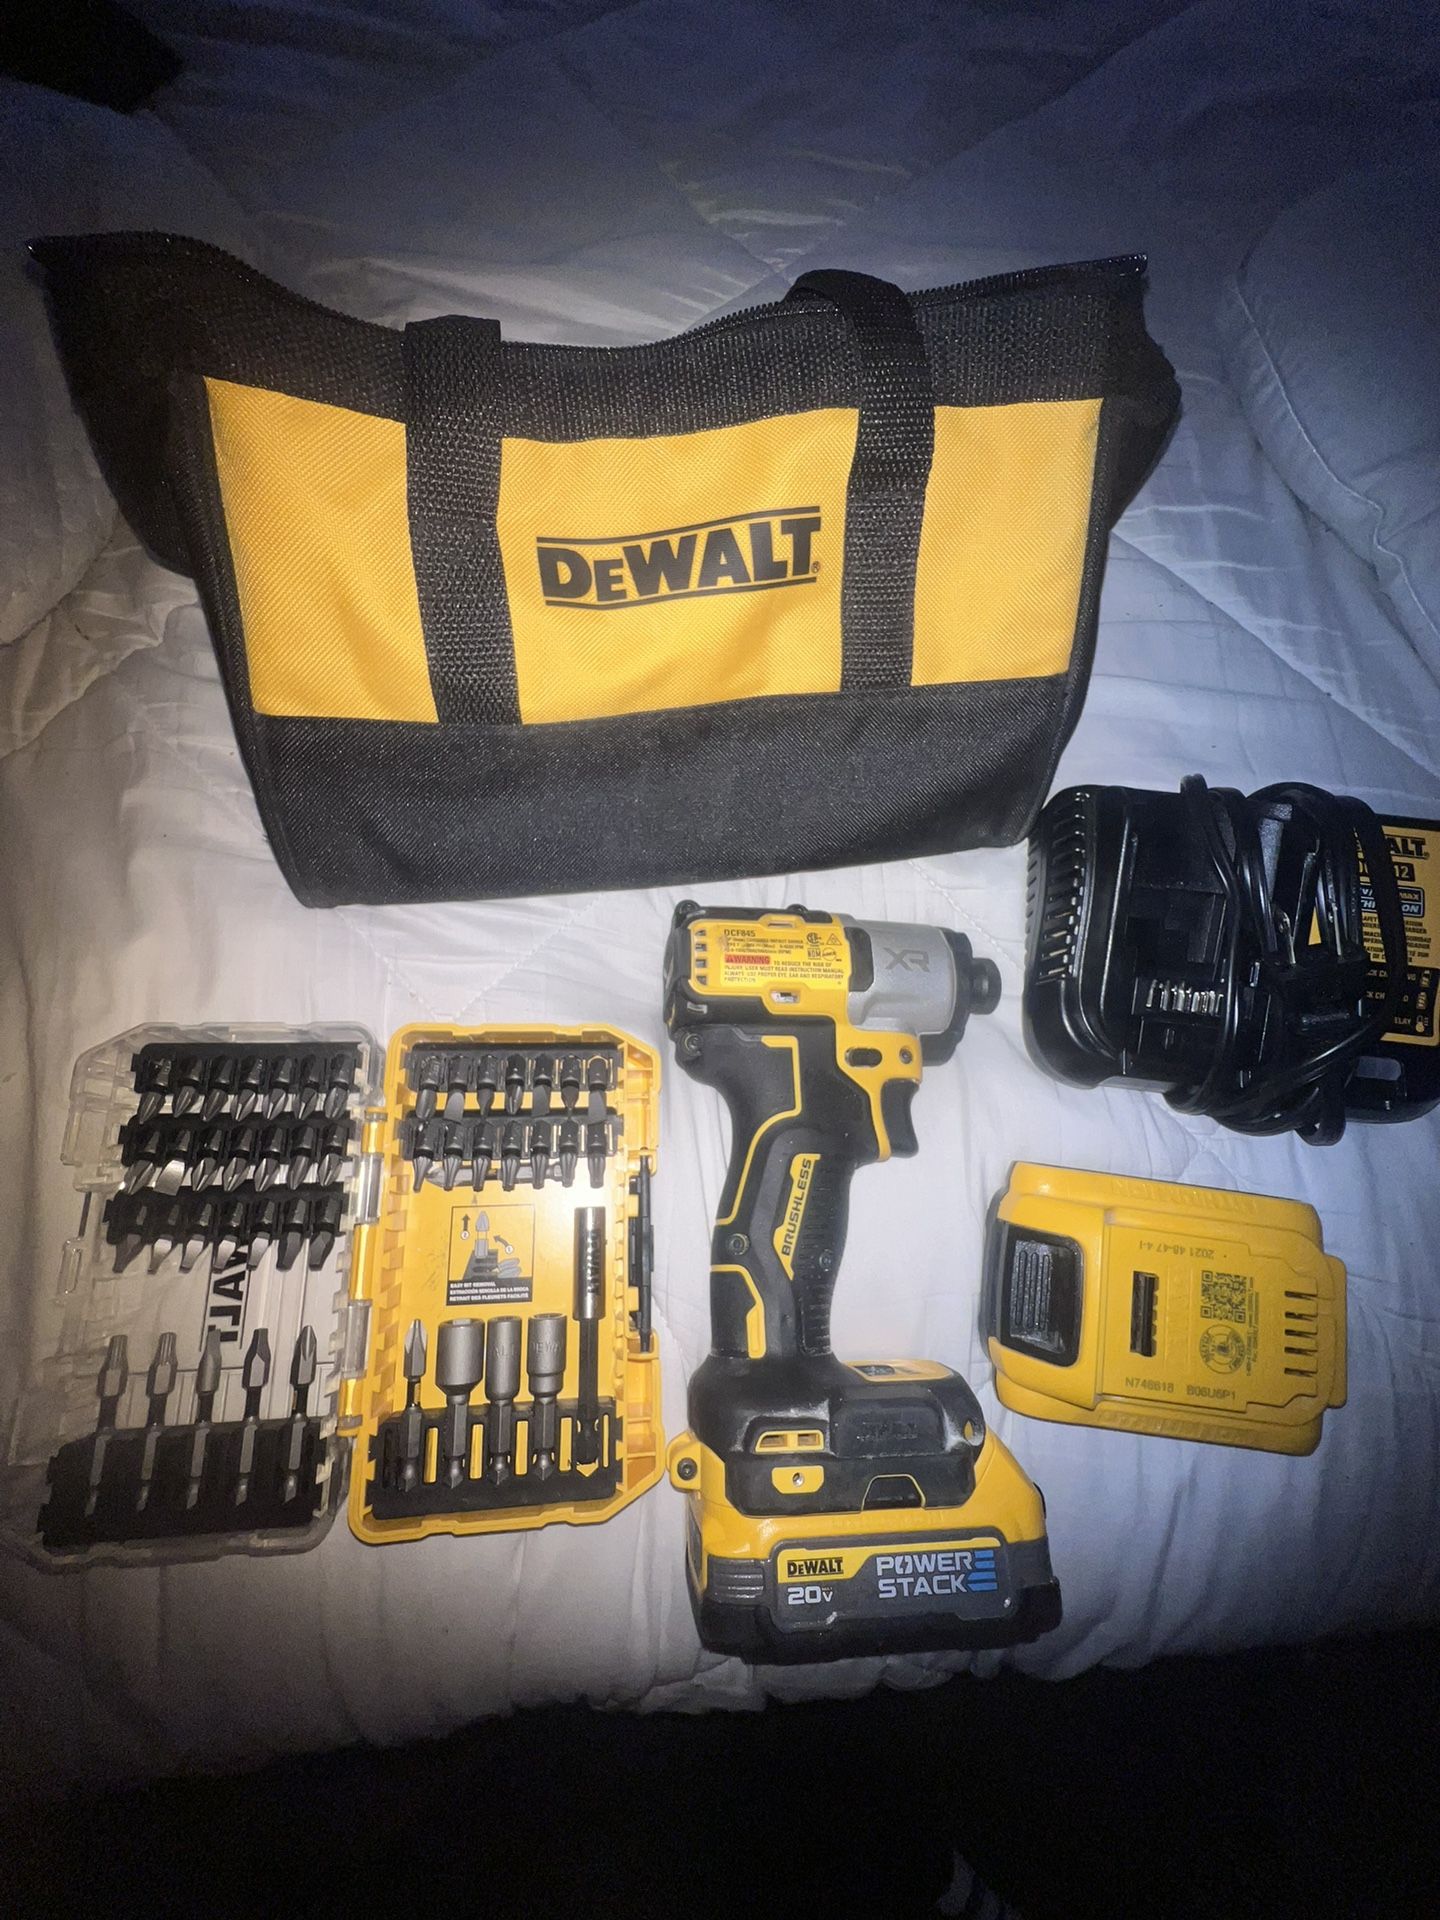 DEWALT XR 20-volt Max 1/4-in Brushless Cordless impact driver (includes 2 batteries, charger & bag)